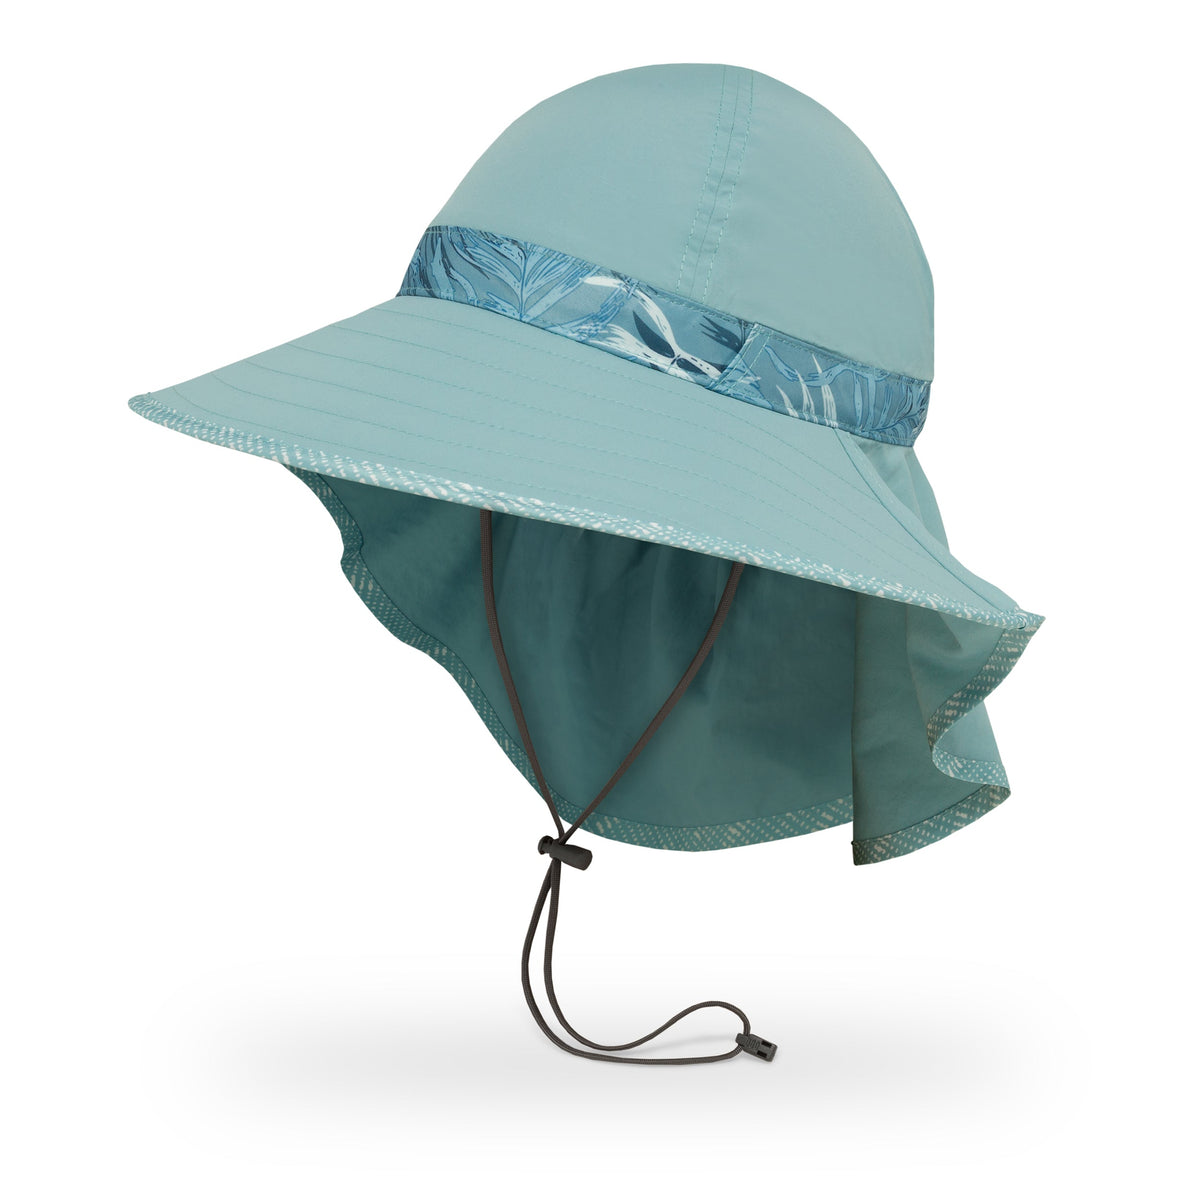 What's the Best Hat Colour for Sun Protection?